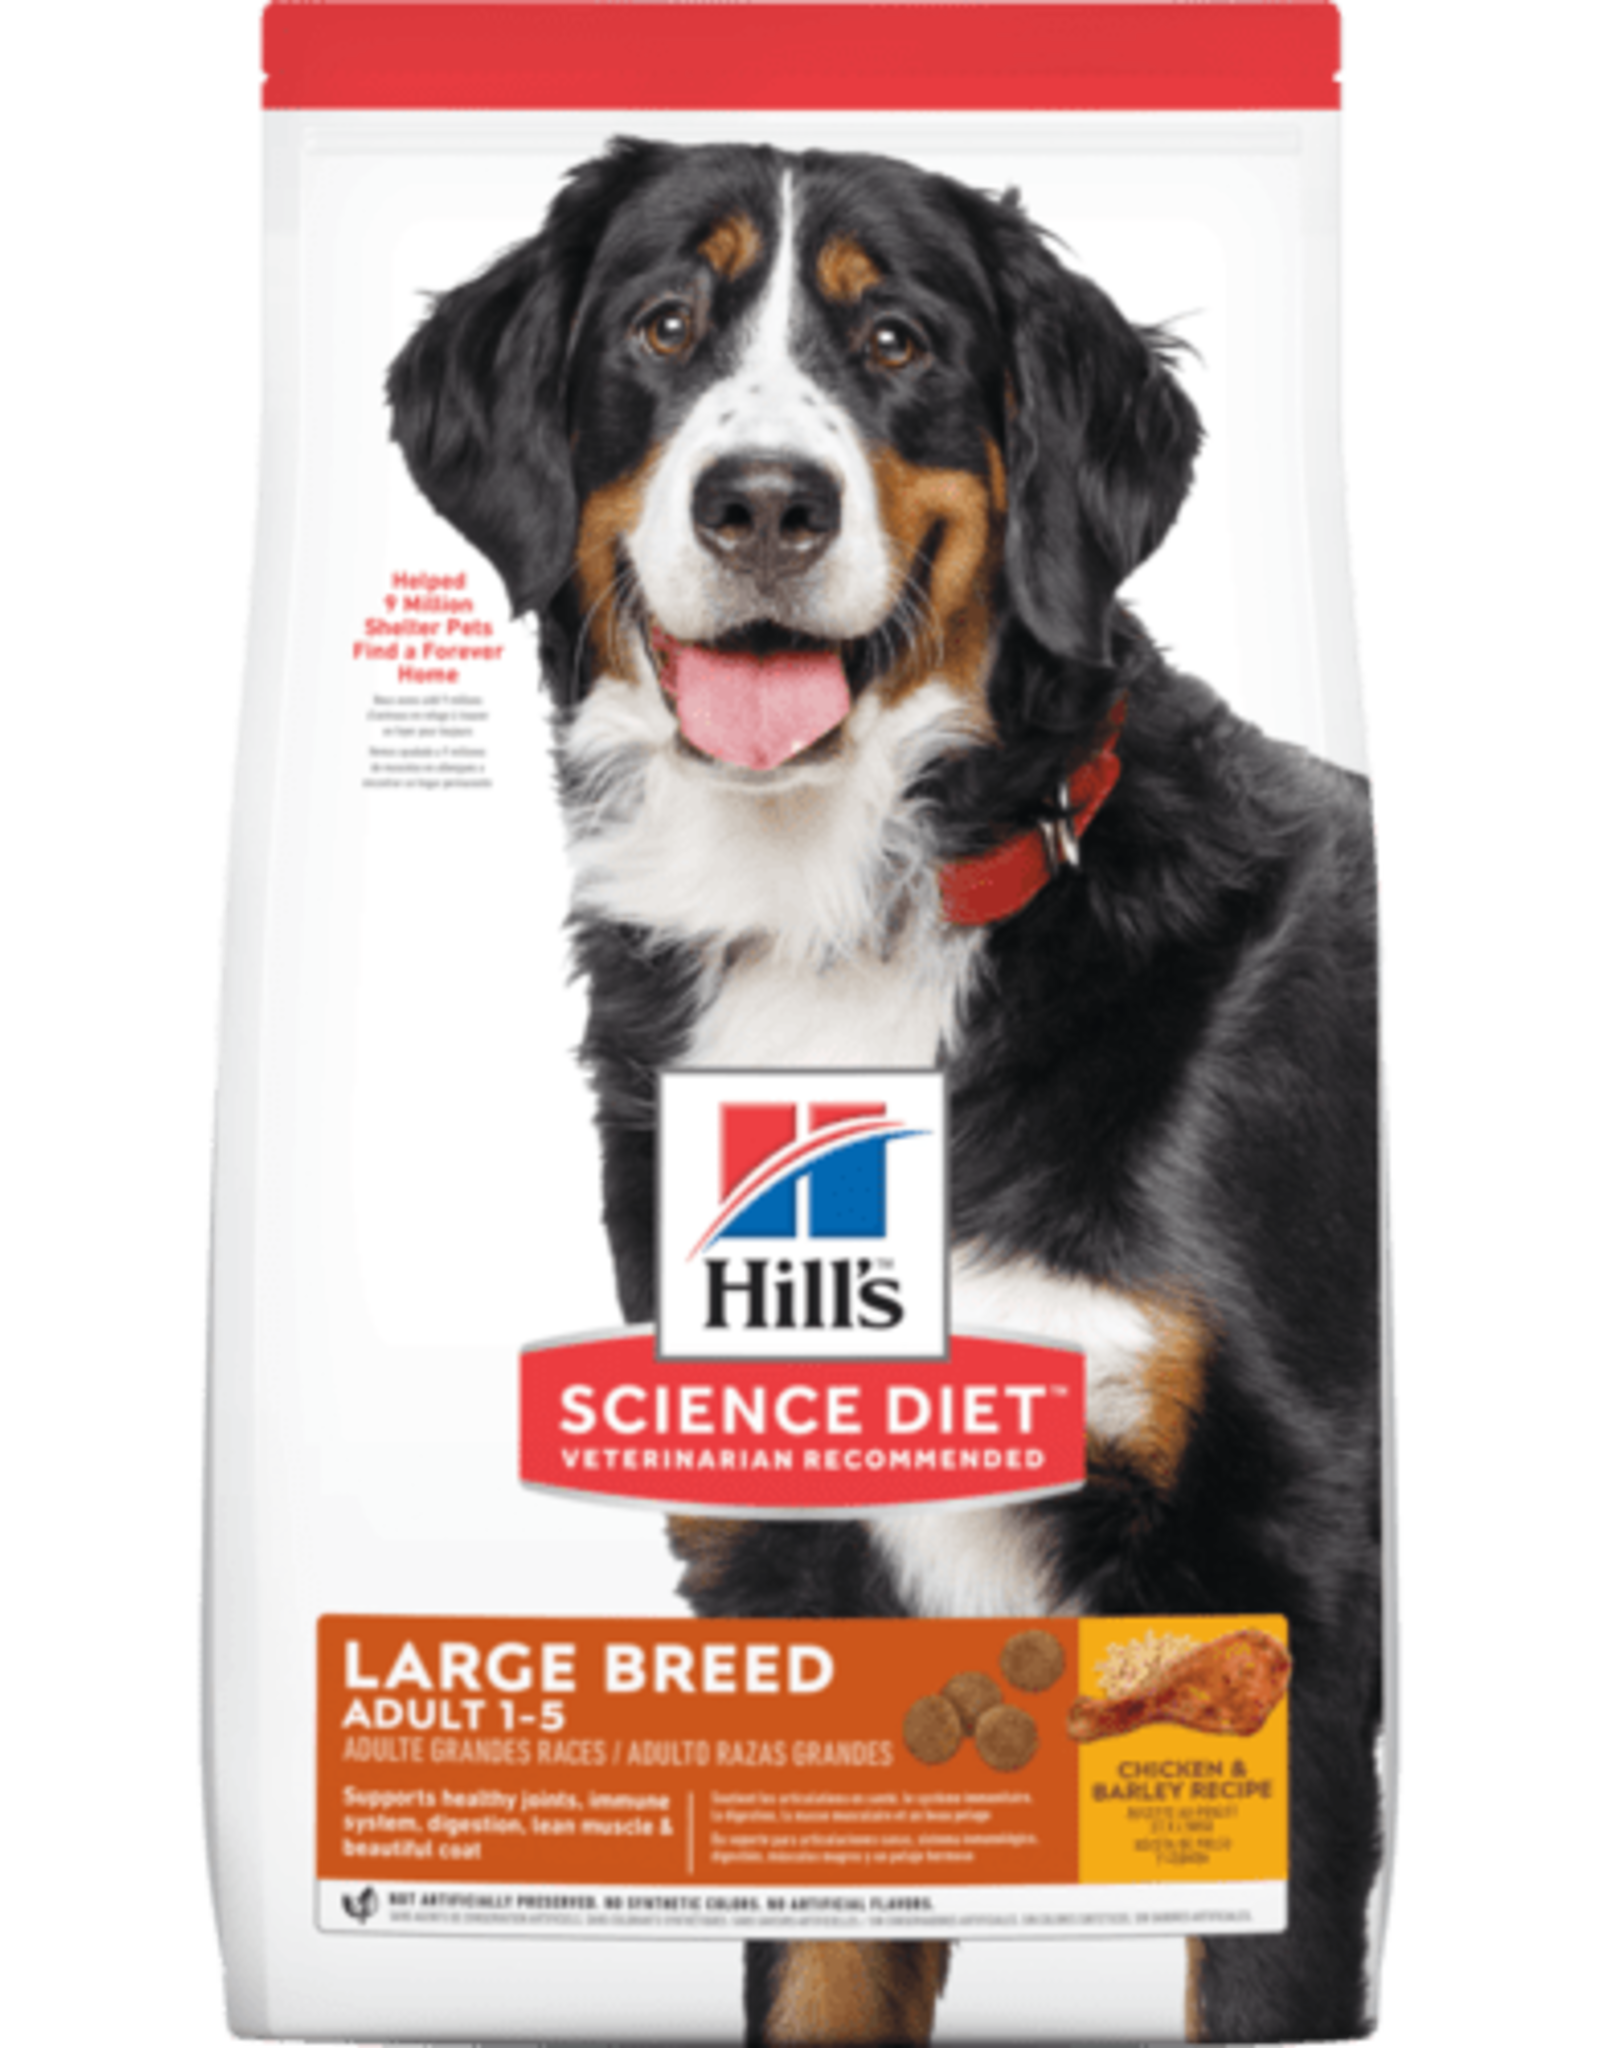 SCIENCE DIET HILL'S SCIENCE DIET CANINE ADULT LARGE BREED 15LBS